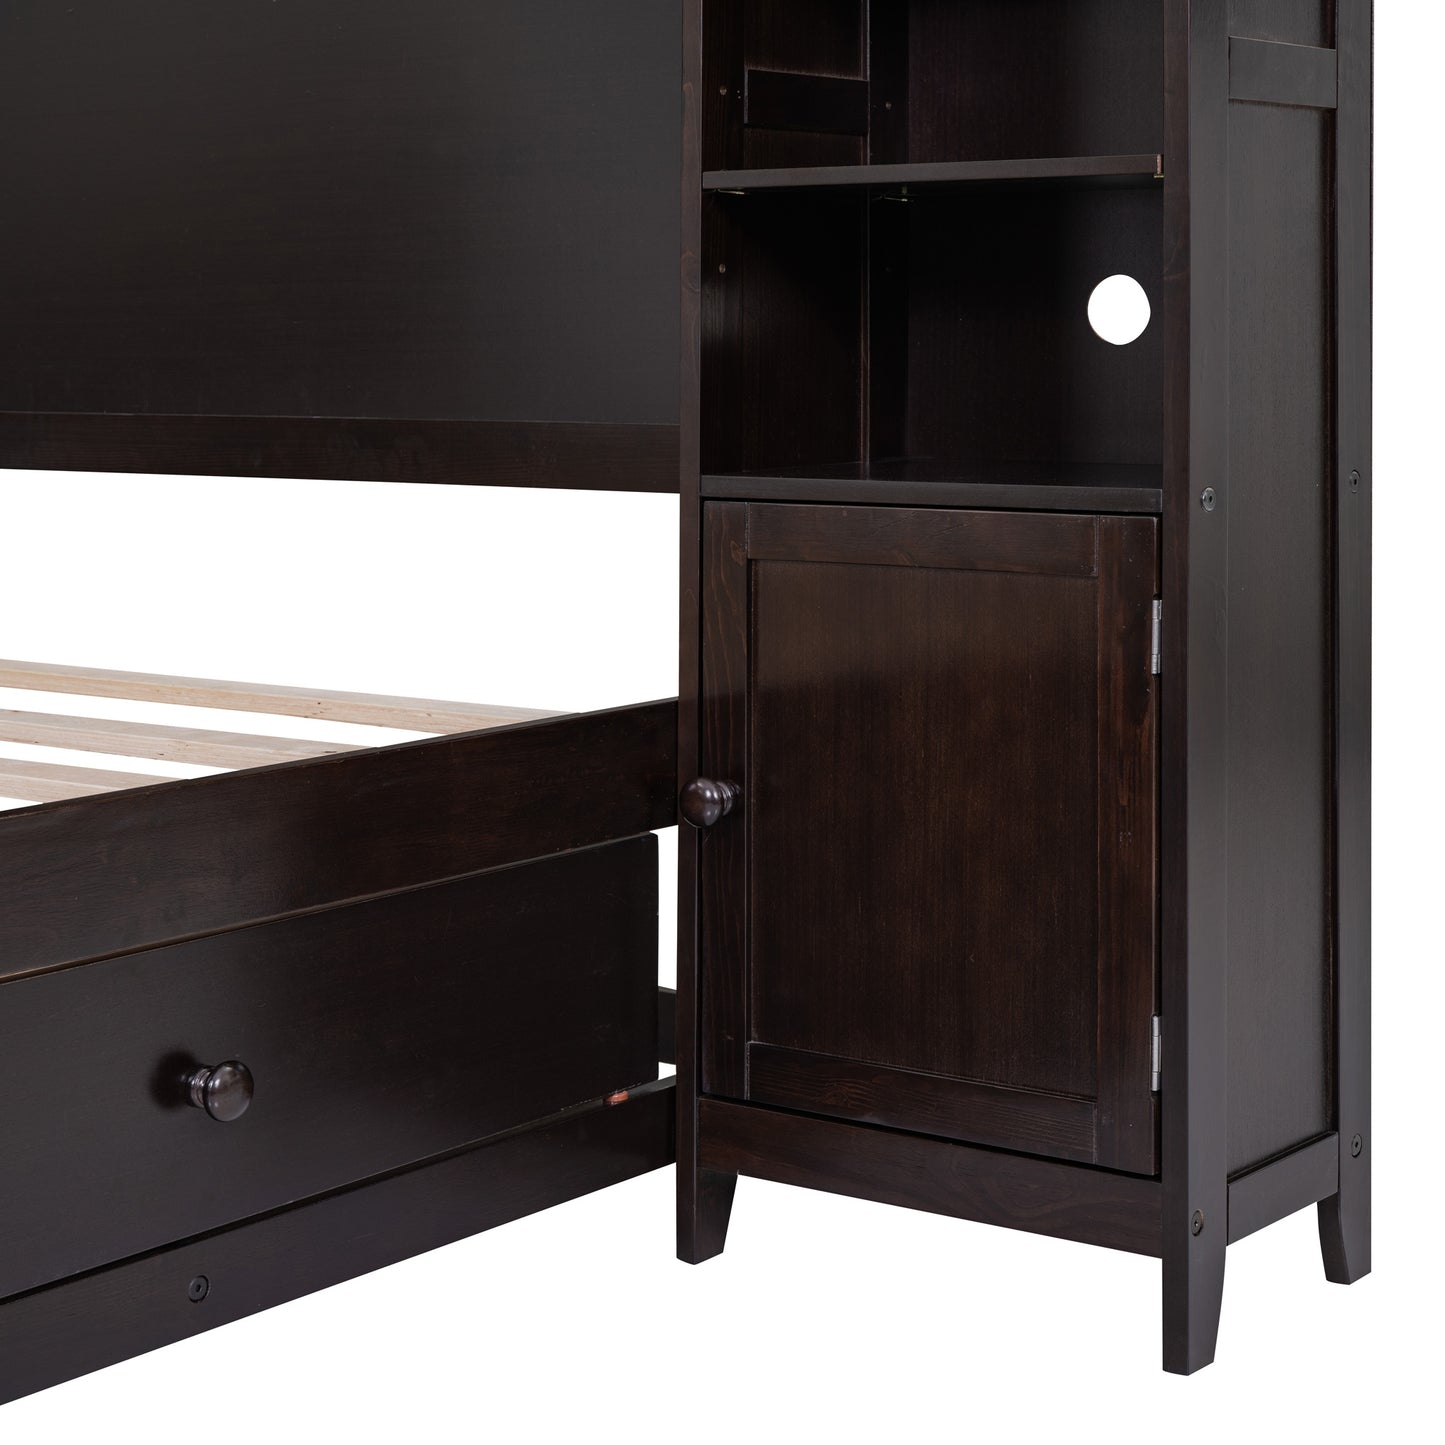 wooden bed with all-in-one cabinet and shelf